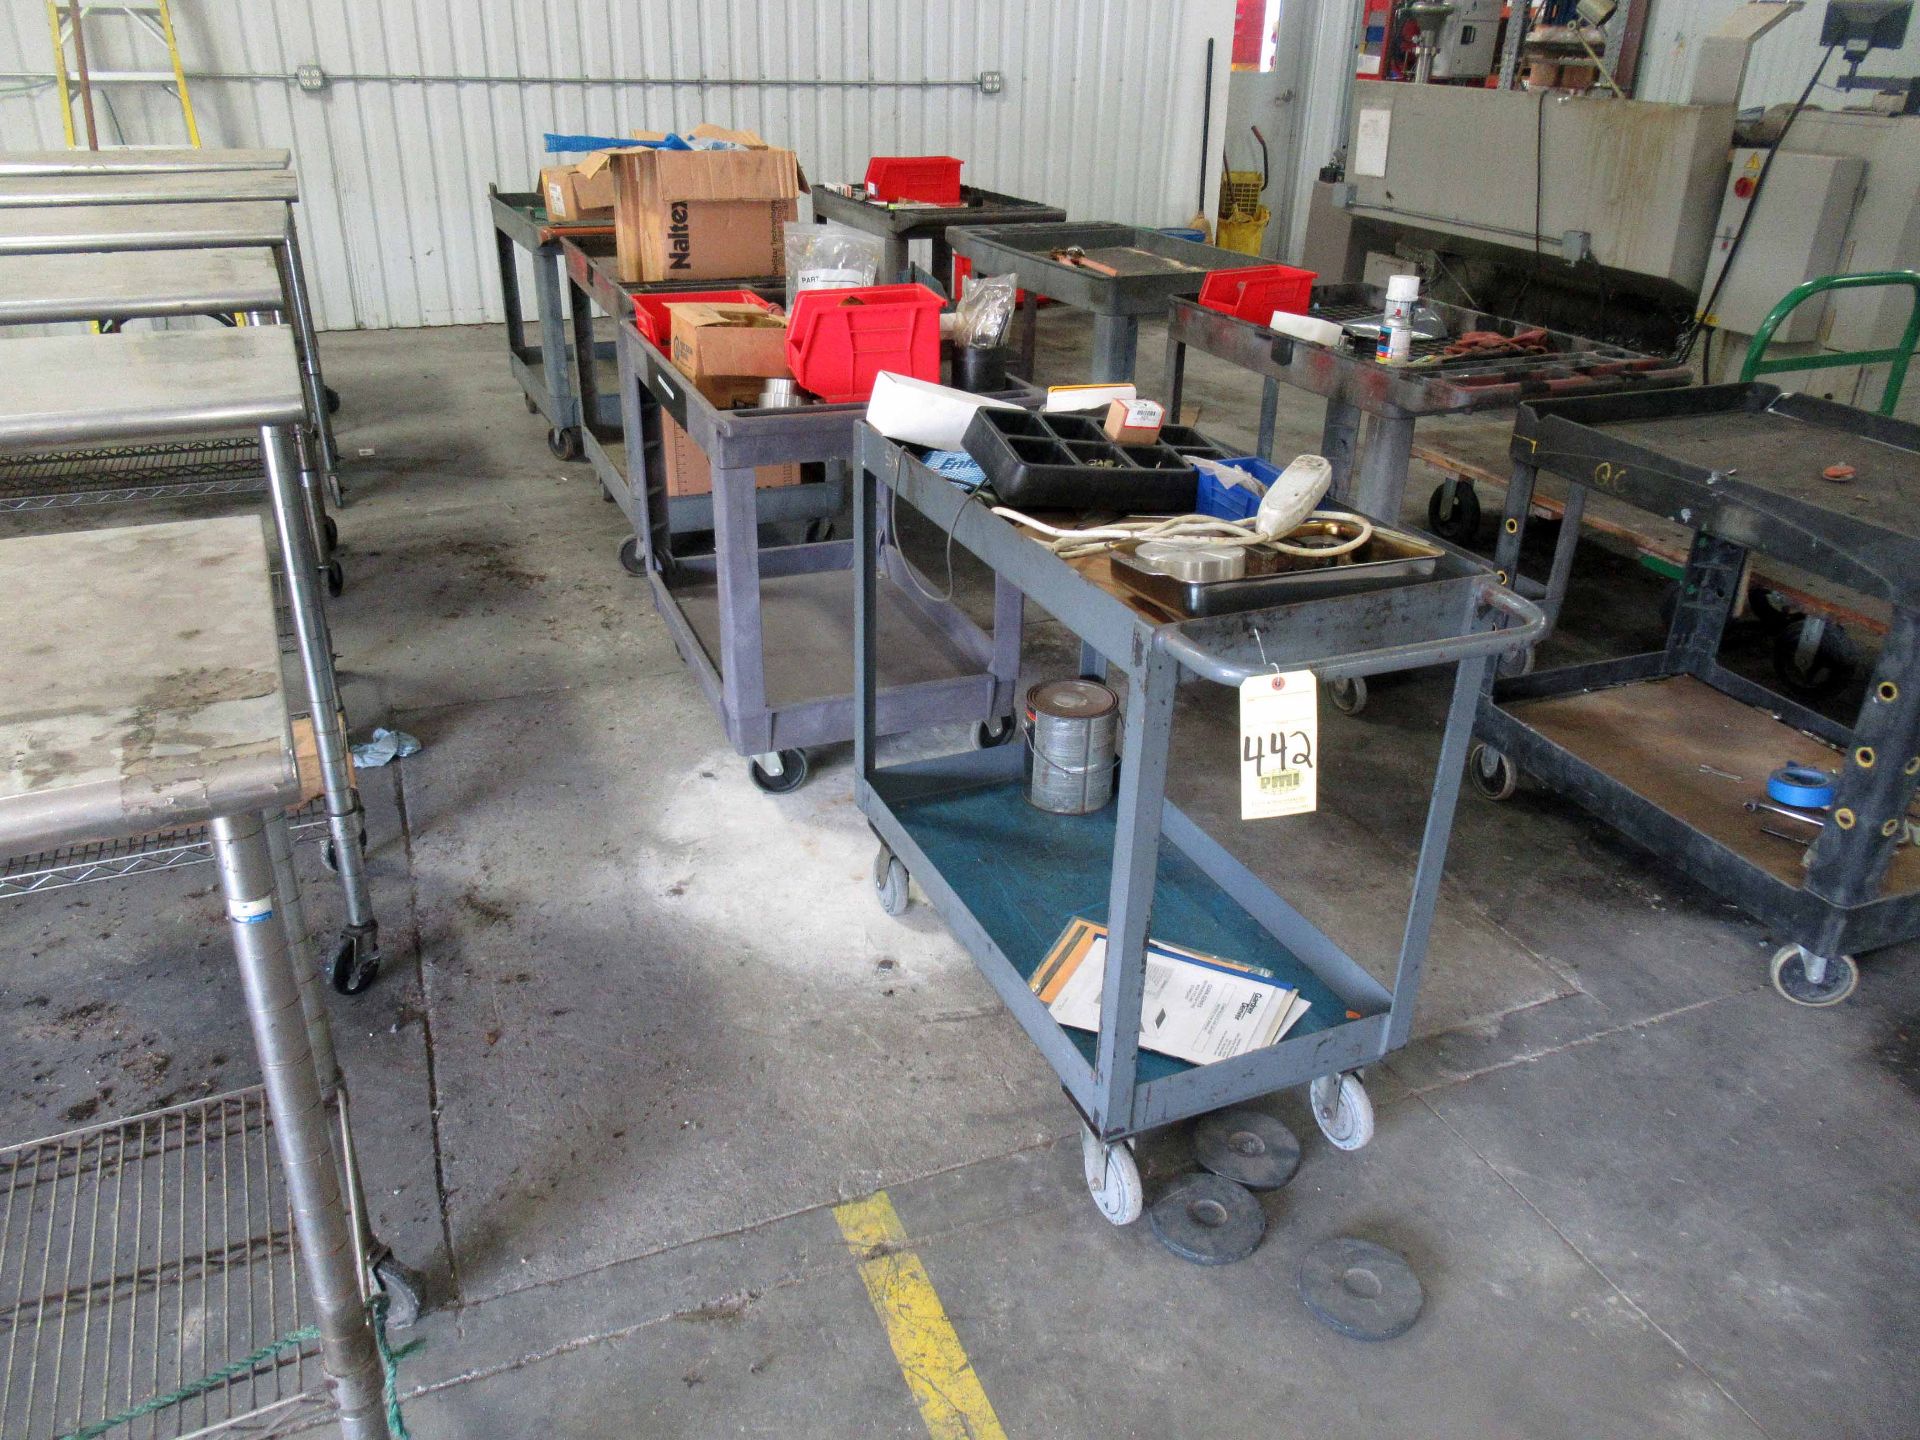 LOT OF ROLLING CARTS (4), w/contents (Located at: Enteq Upstream, 9302 Lambright Road, Houston, TX